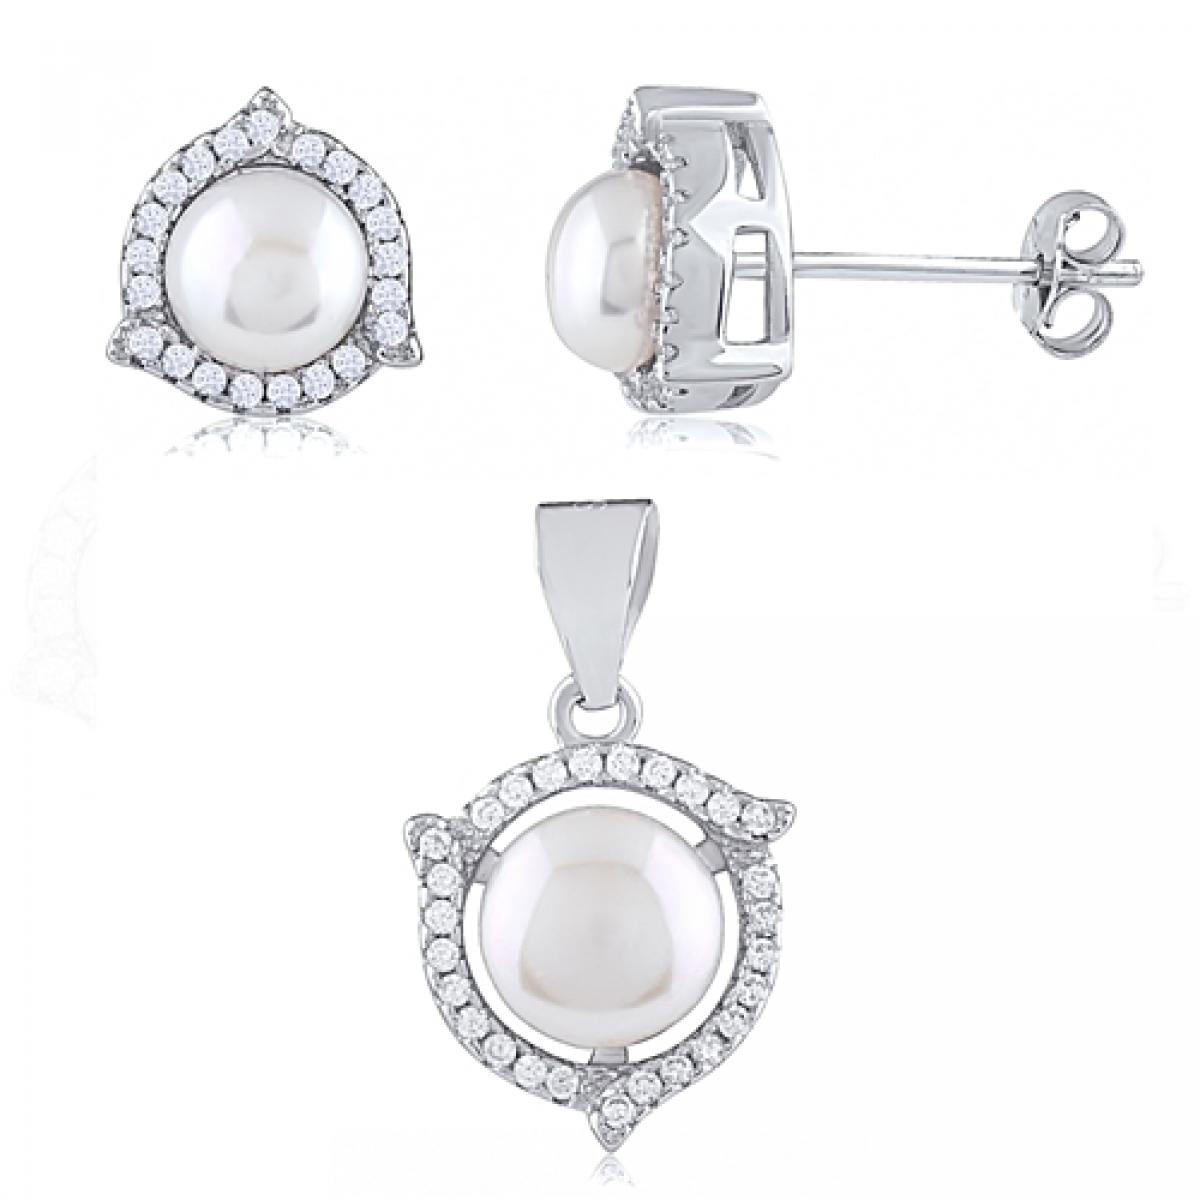 Picture of MDR Trading SS-TL089 Silver & White Freshwater Pearl In A Circle Surrounded by Cubic Zirconia Stones Pendant & Earrings Set